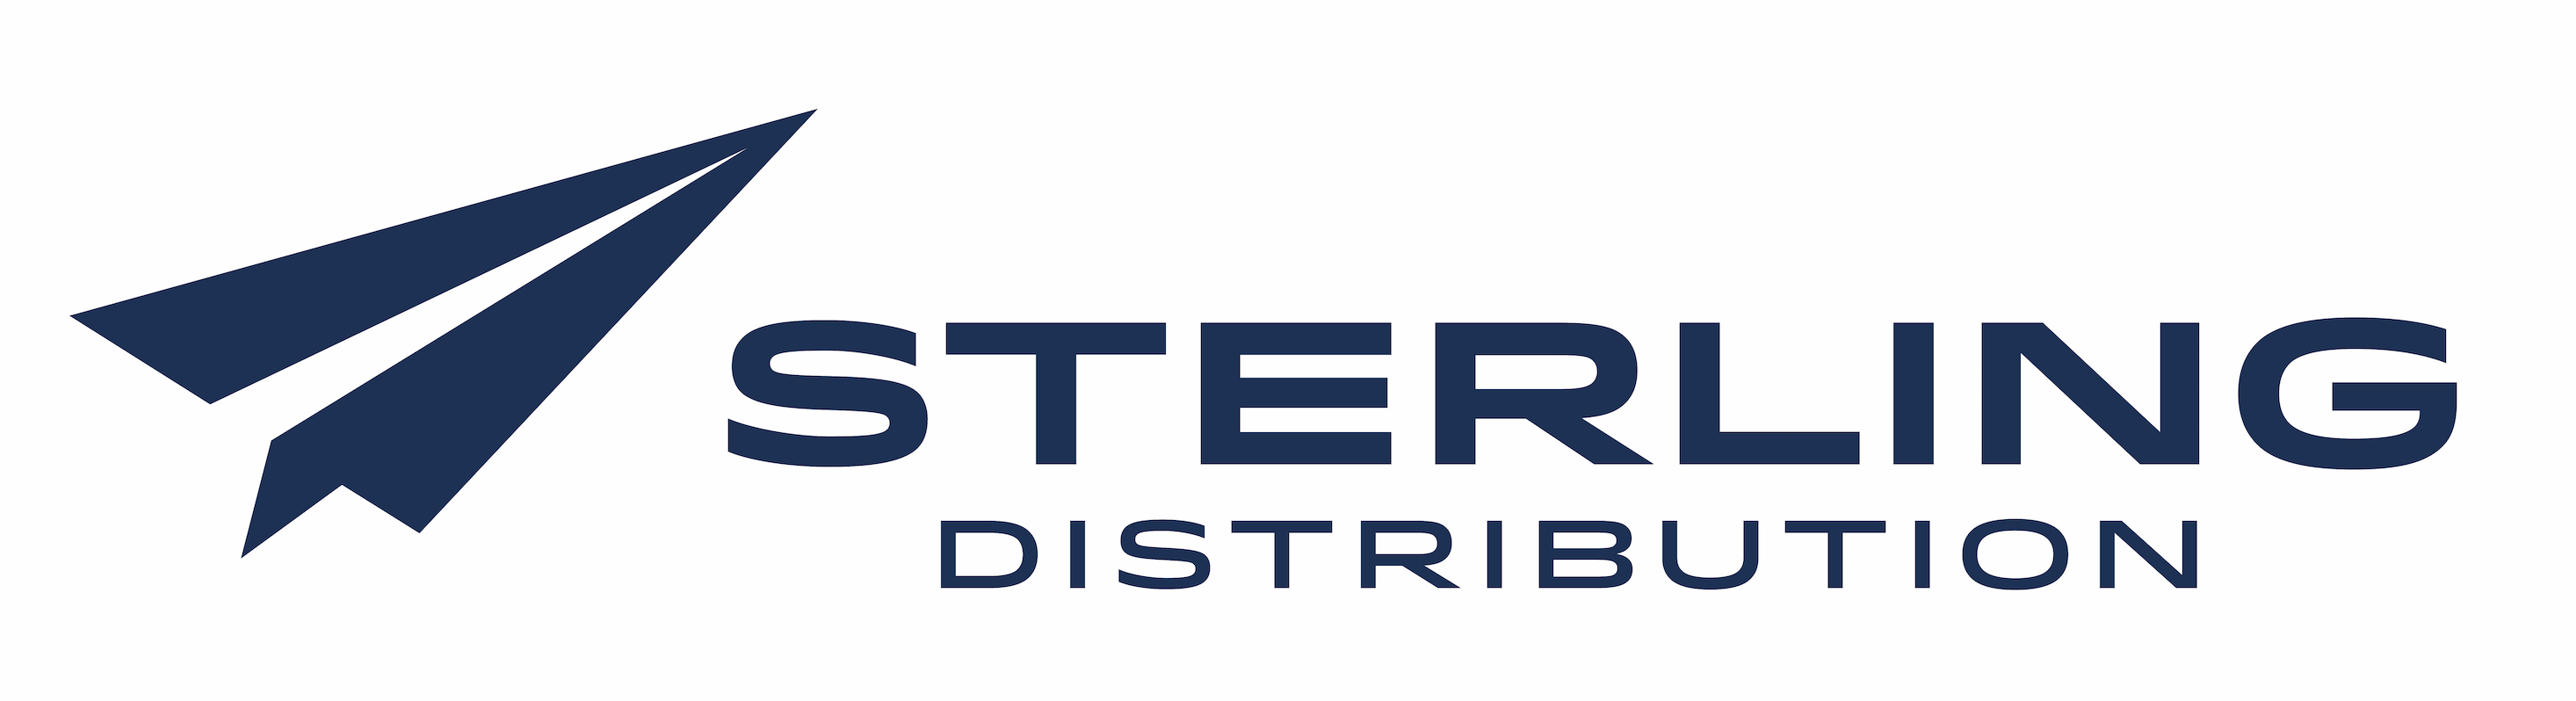 Sterling Distribution-cropped